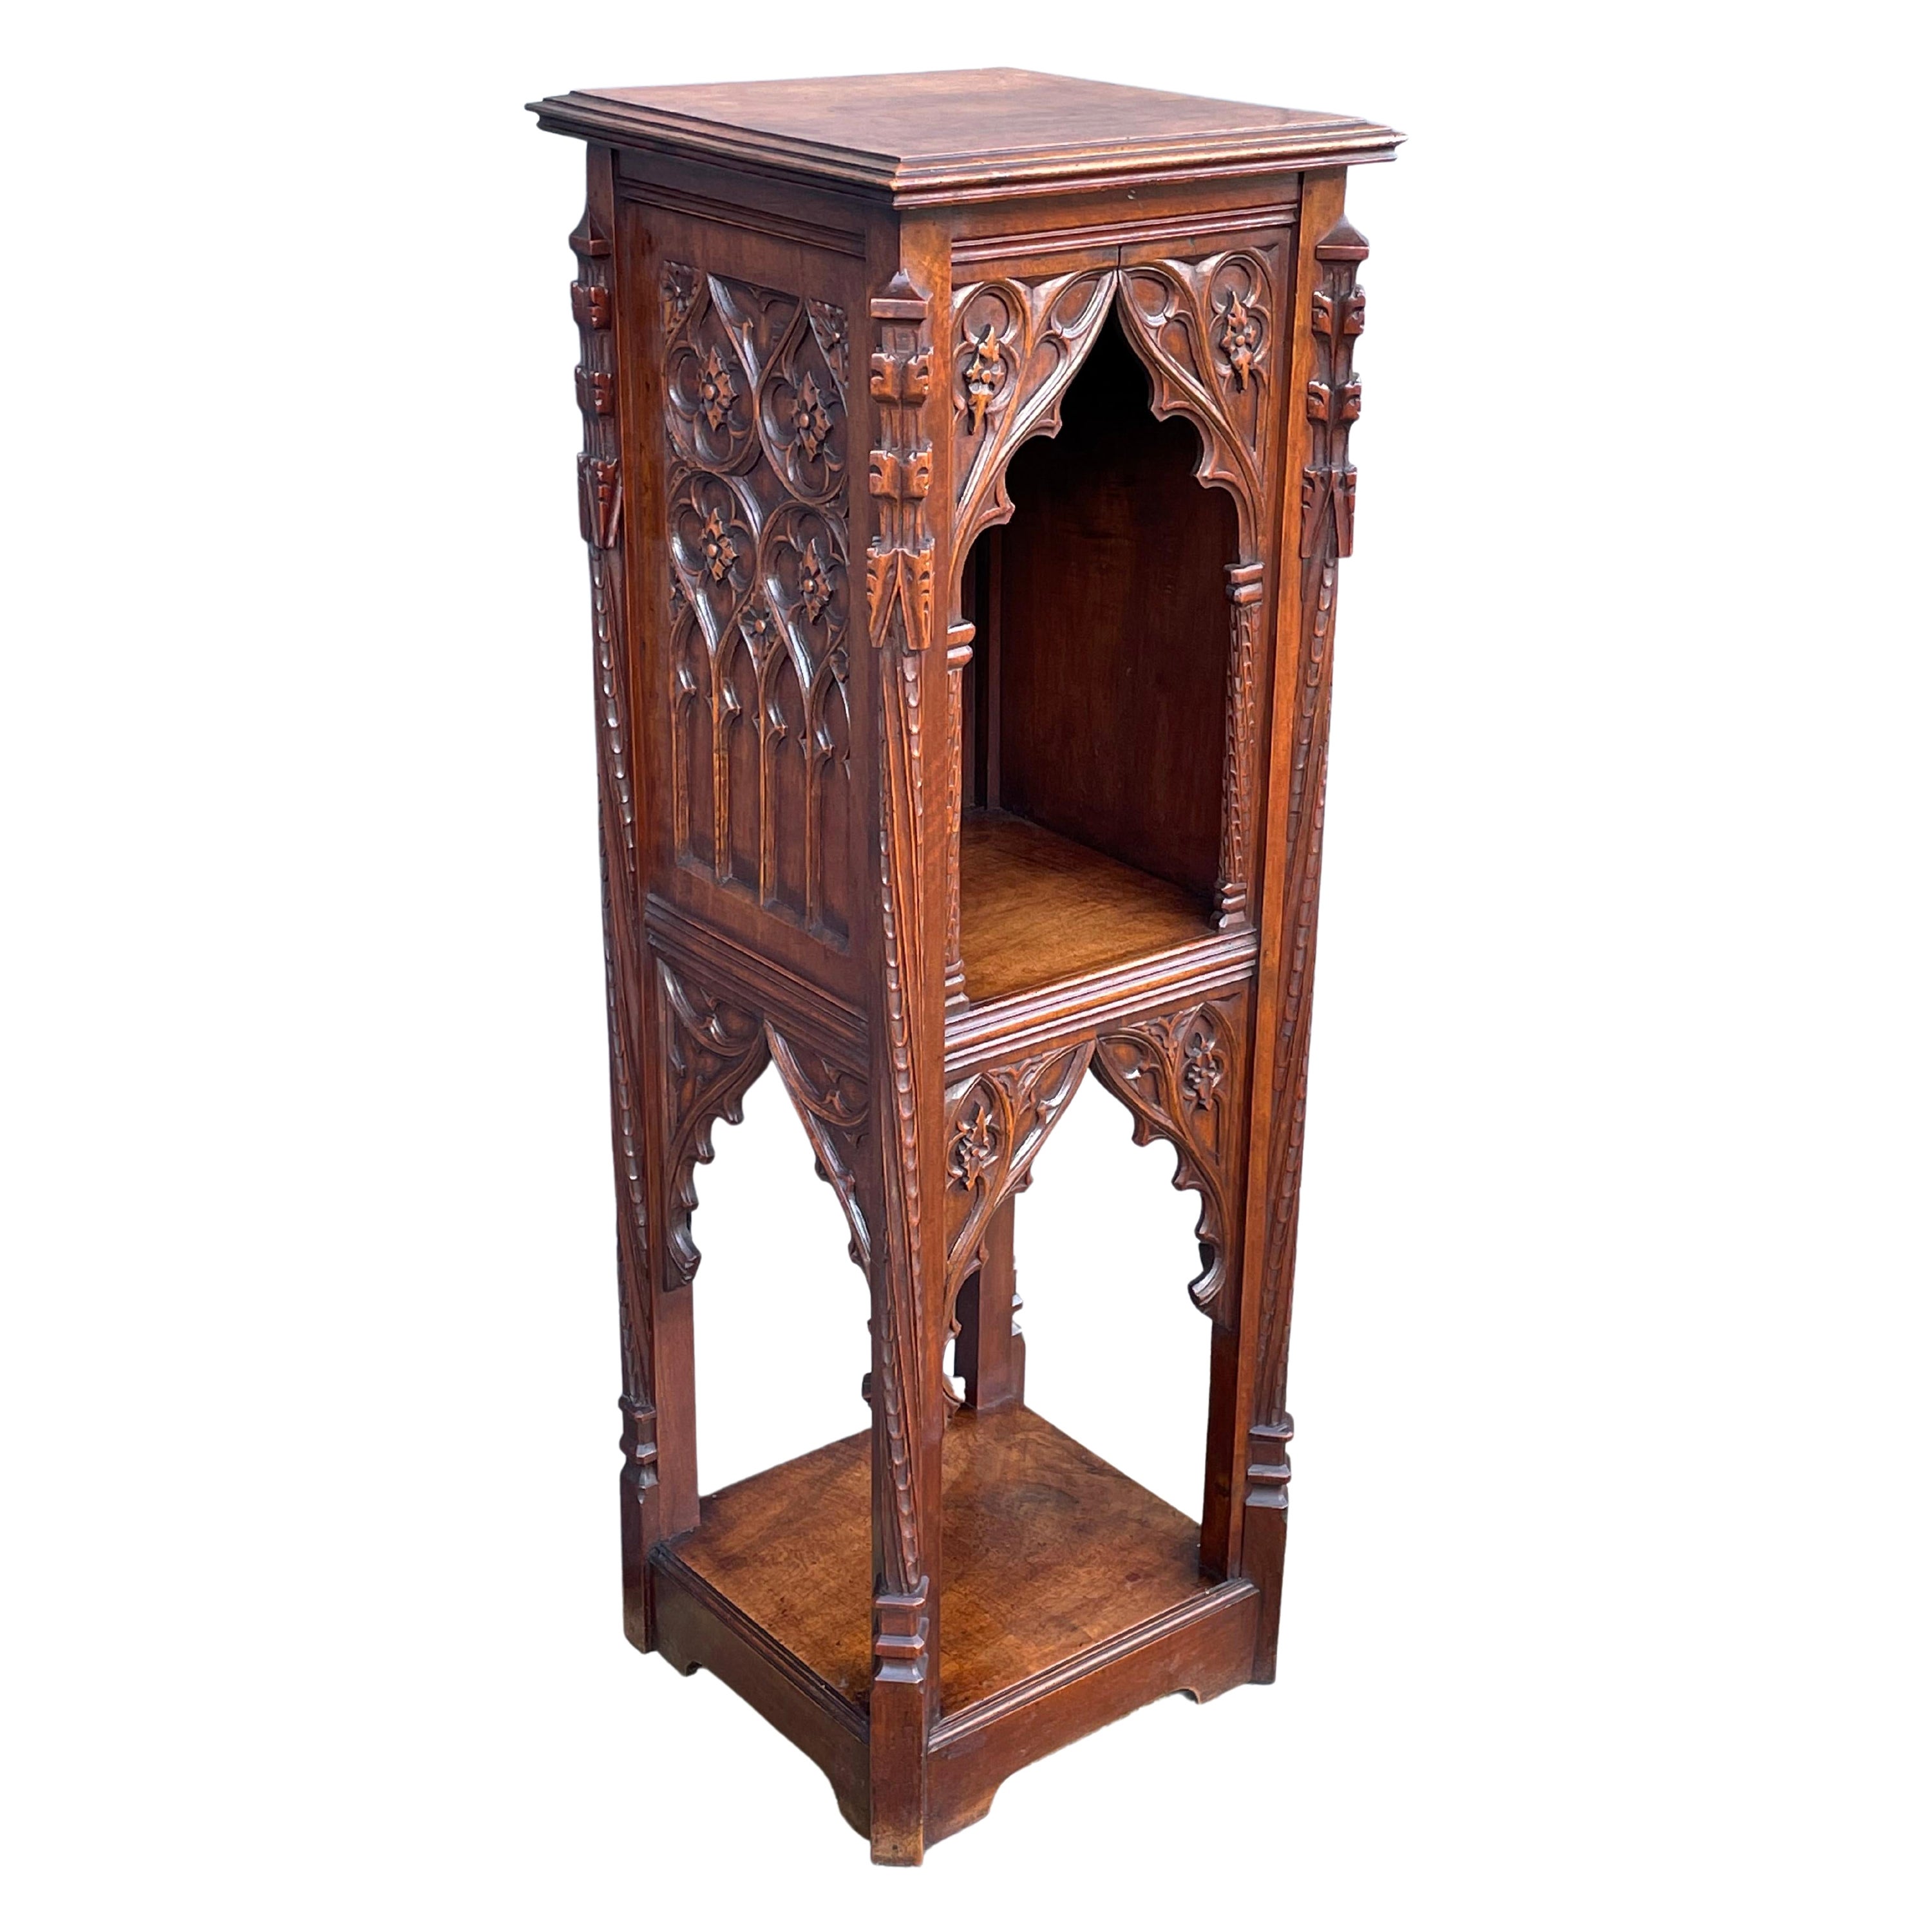 Stunning Antique Hand Carved Gothic Revival Nutwood Pedestal Sculpture Stand For Sale